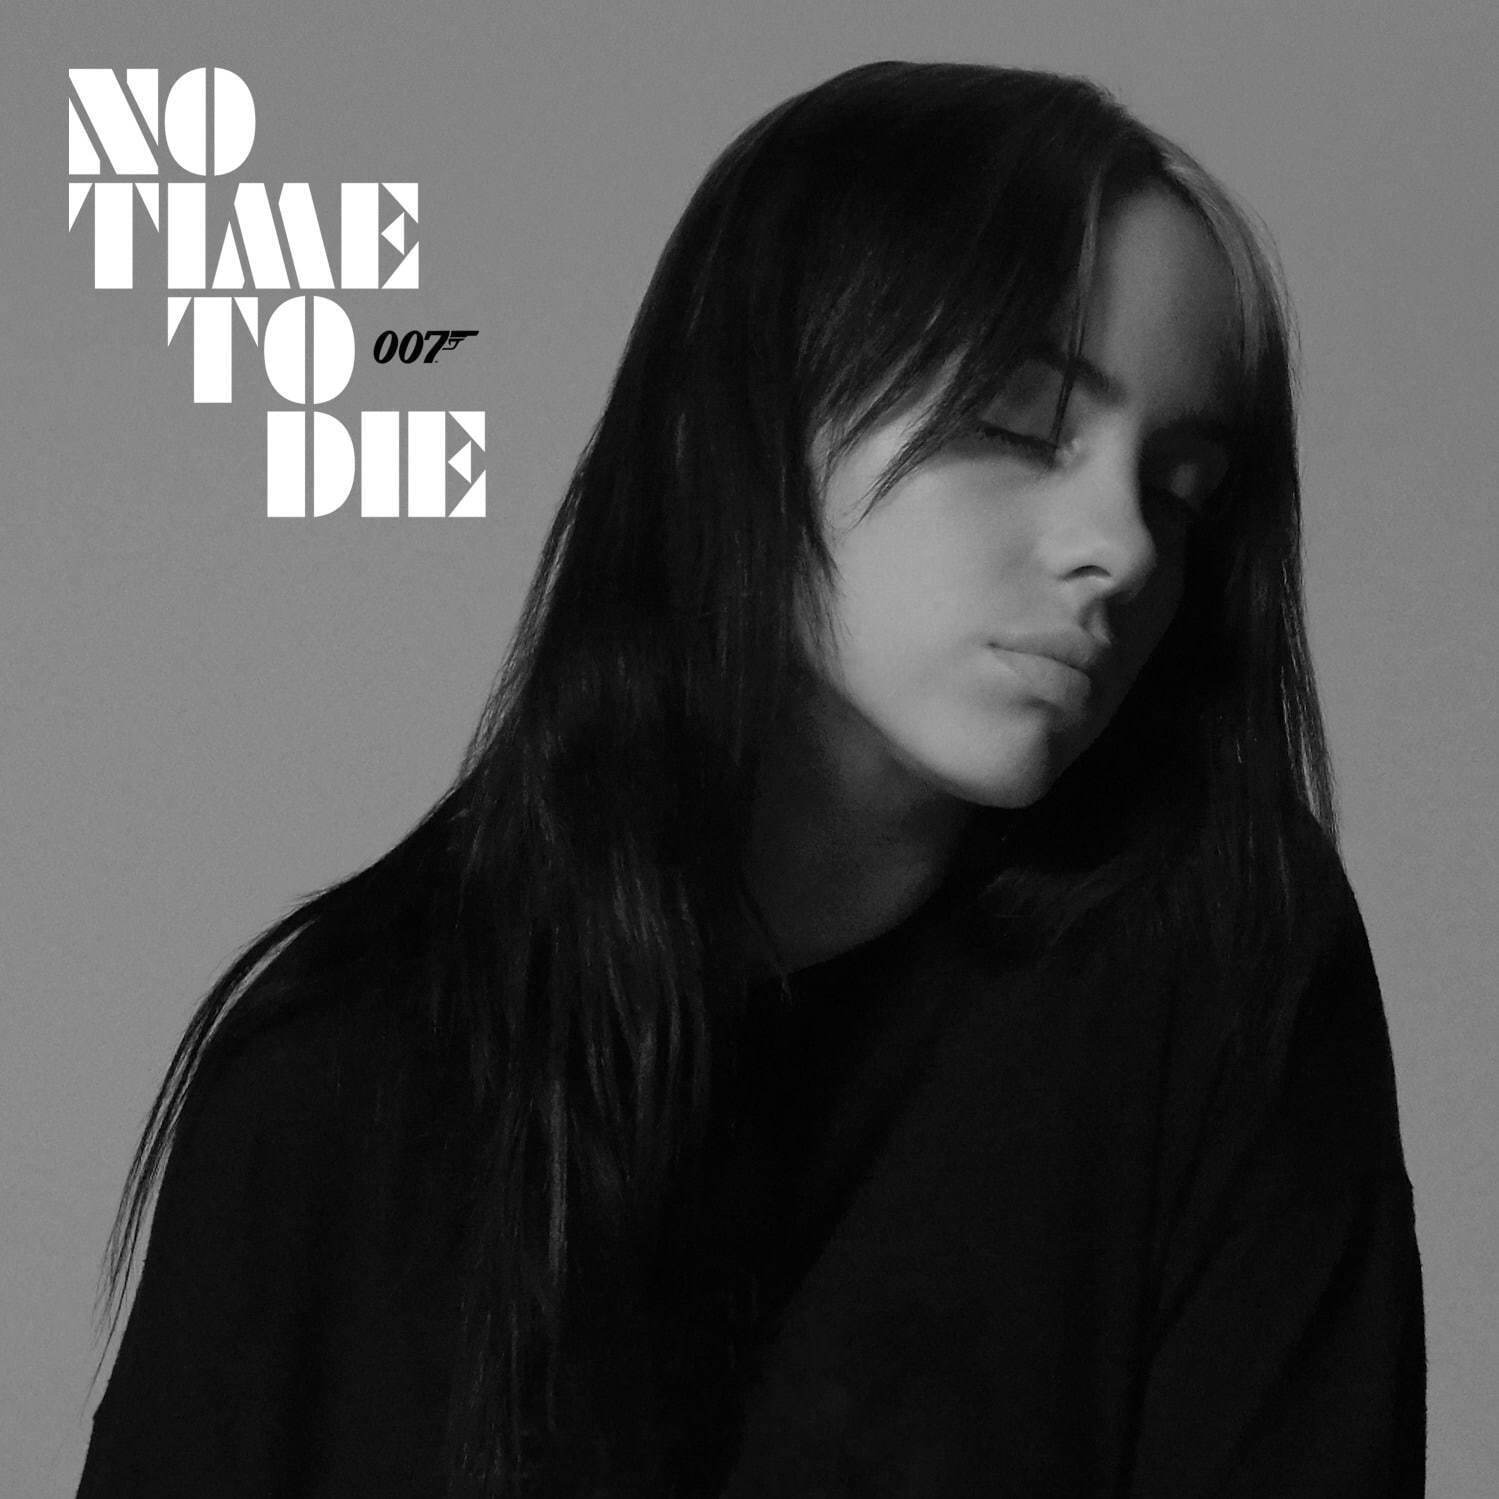 『No Time to Die』(『007／ノー・タイム・トゥ・ダイ』)</b width="1499" height="1499">